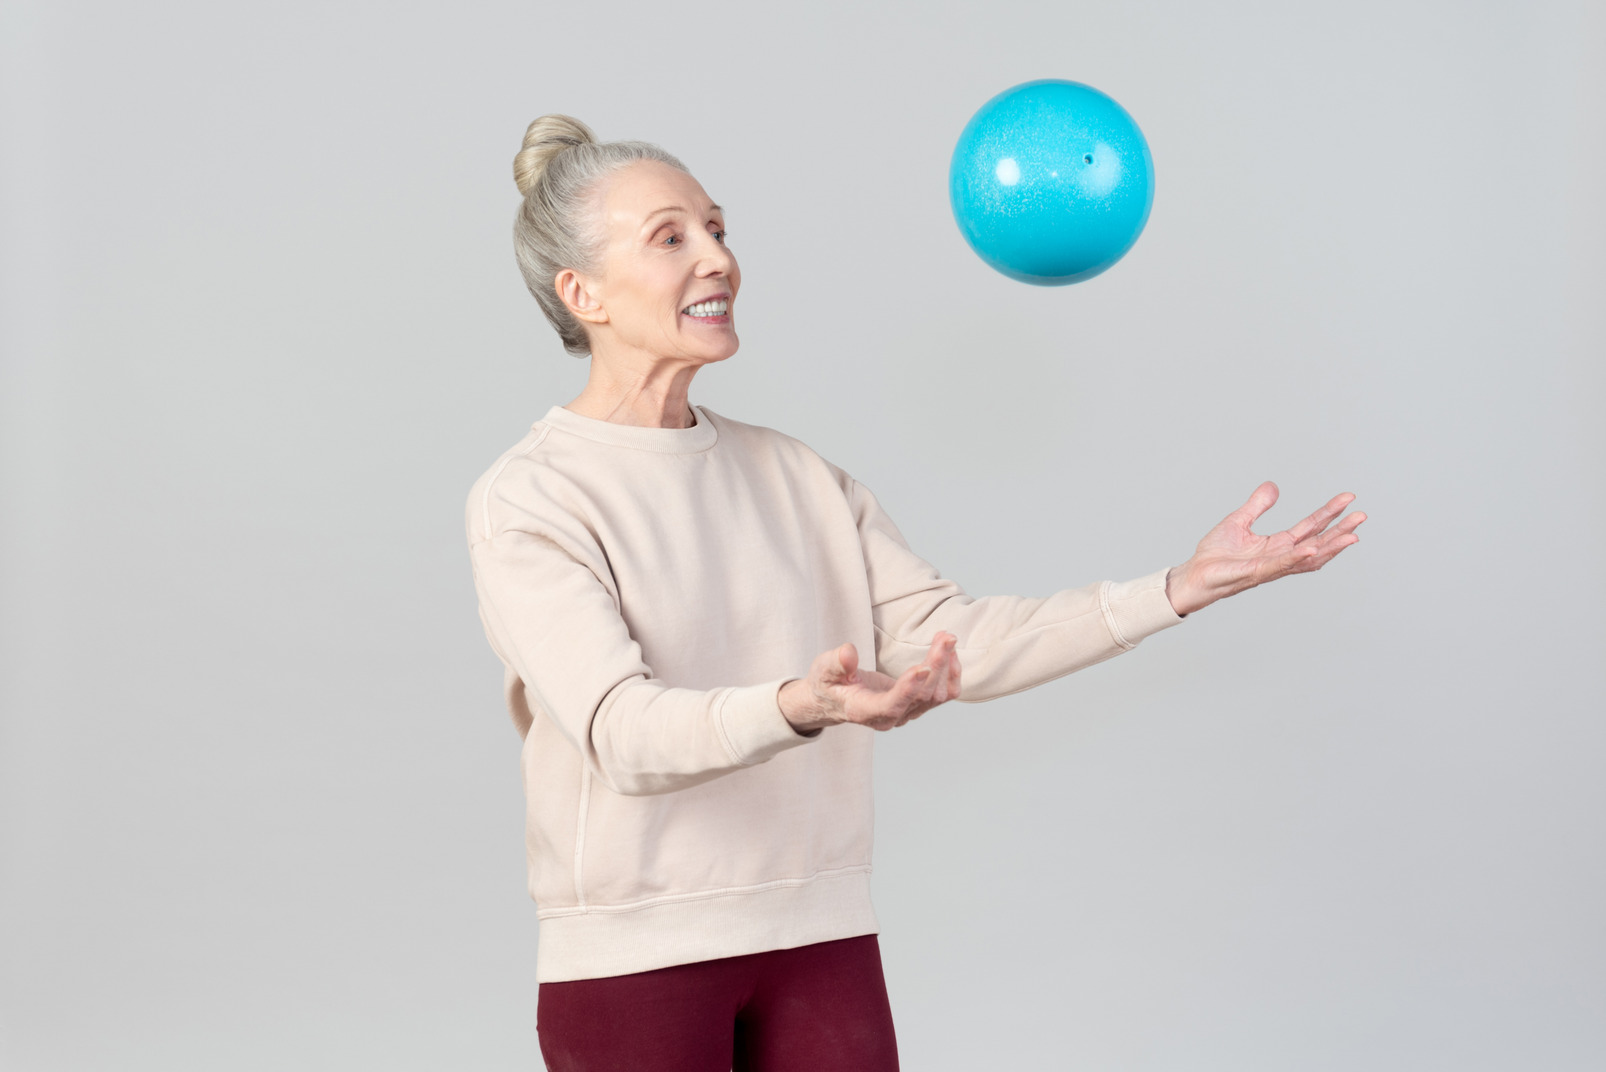 Age is no barrier for staying healthy and active